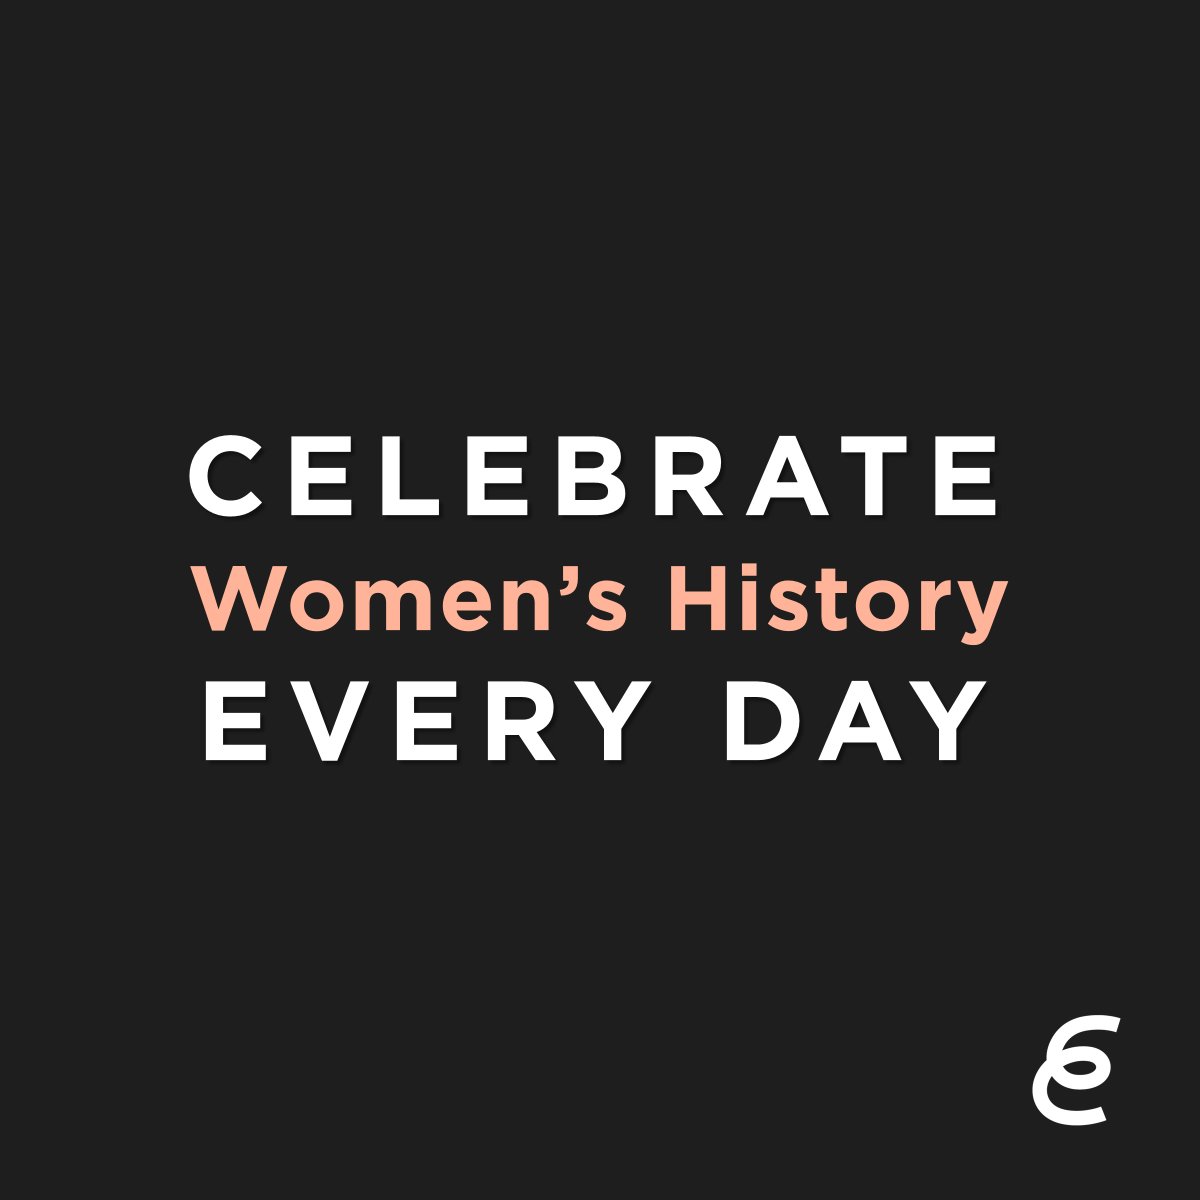 It's Women's History Month! This month commemorates the contributions of women that have shaped our world today and reminds us to support the women who will make history tomorrow. #womenshistory #whm #DEIB #diversity #equity #inclusion #belonging #embraceequity